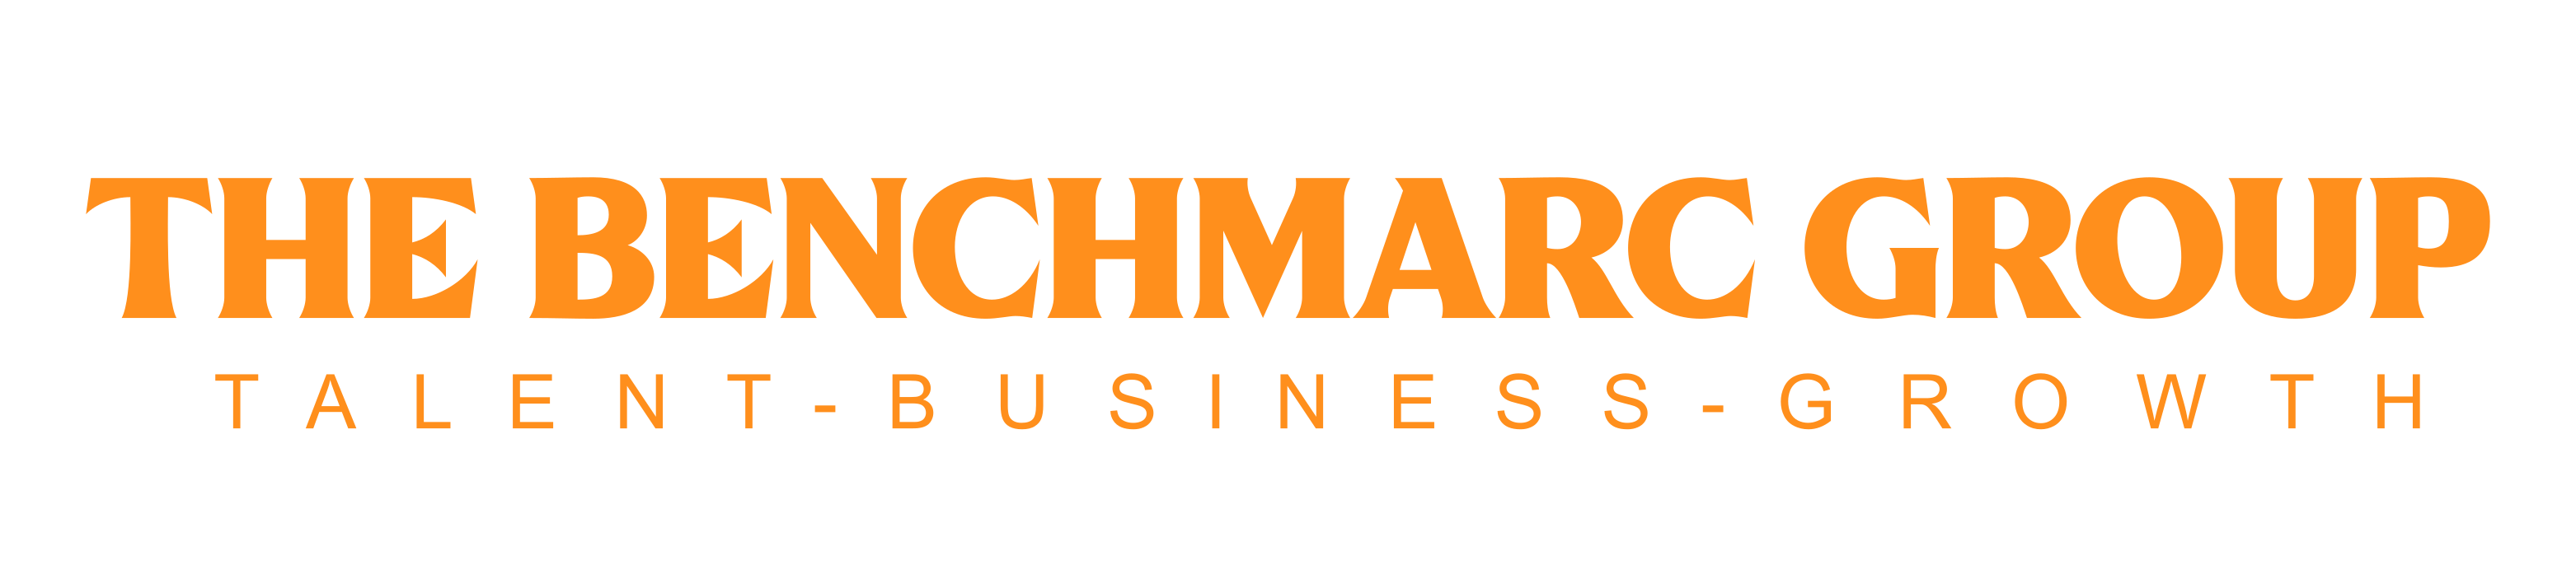 The Benchmarc Group